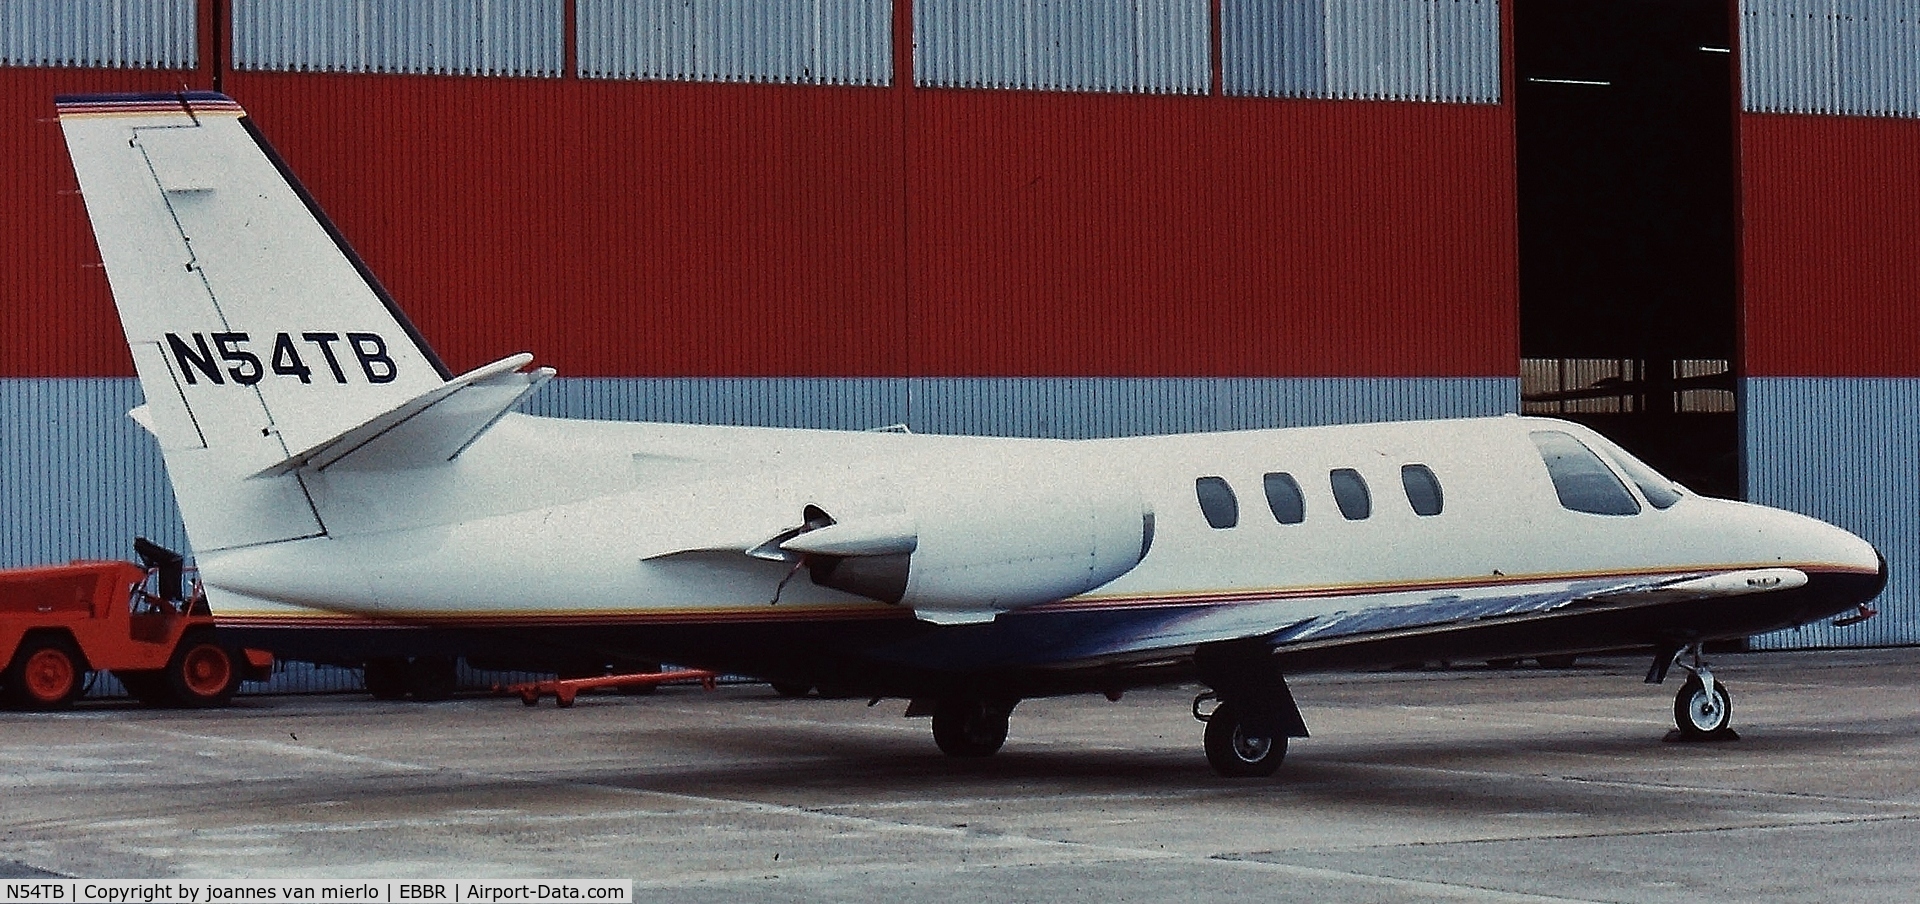 N54TB, 1979 Cessna 501 Citation I/SP C/N 501-0107, Owned and flown by Thierry Boutsen, Belgian F1-racer